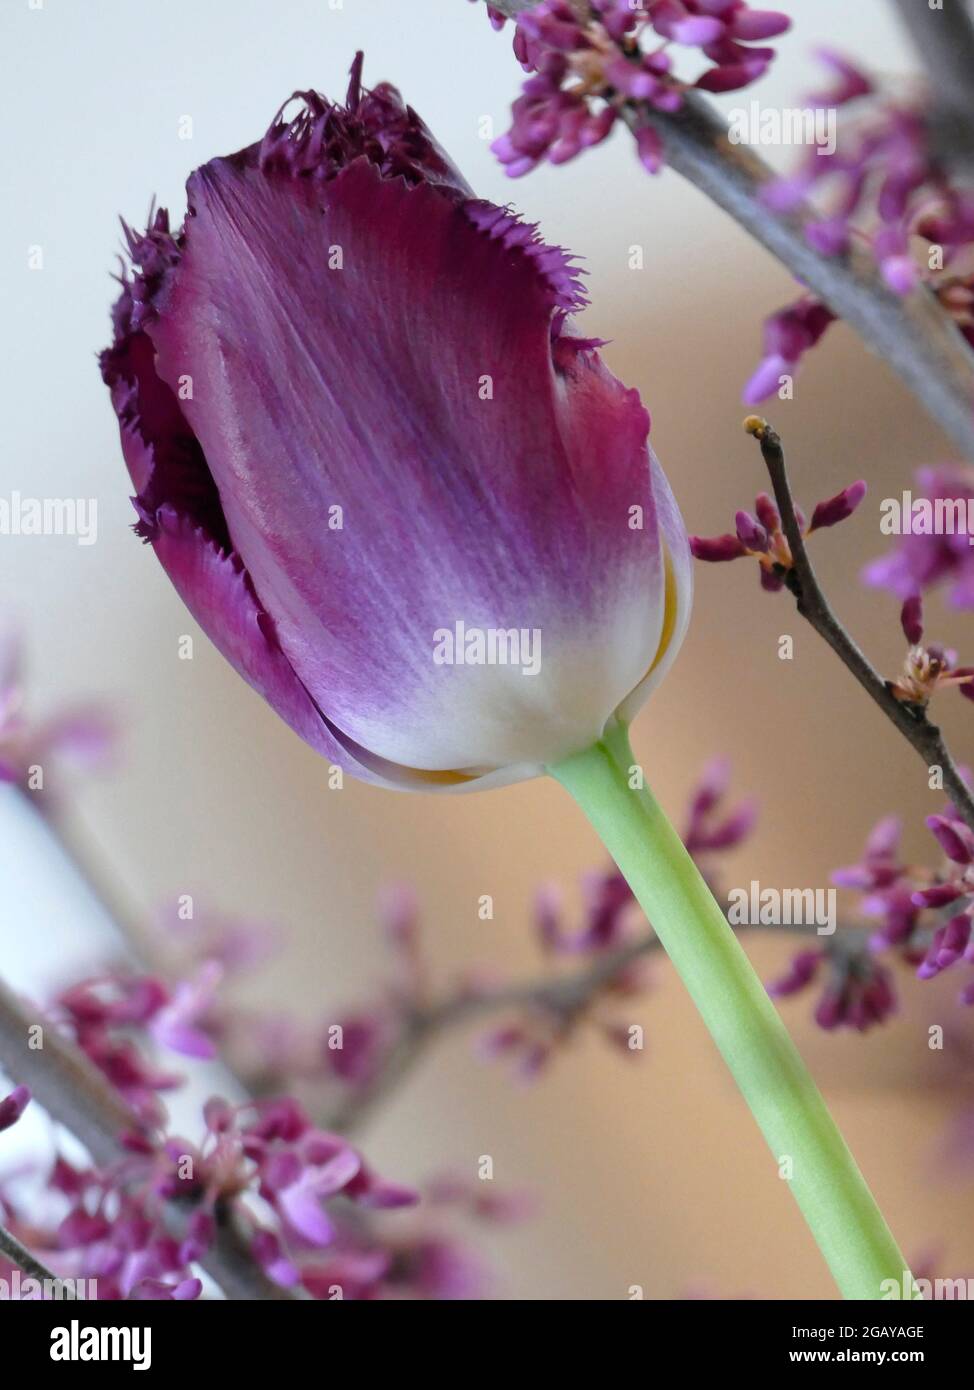 Purple Crystal Tulips Tulipa with a Creamy White Base and Fringed Petals among RedBud Tree Branches with Tiny Pink/Purple Flowers for a Spring Scene Stock Photo